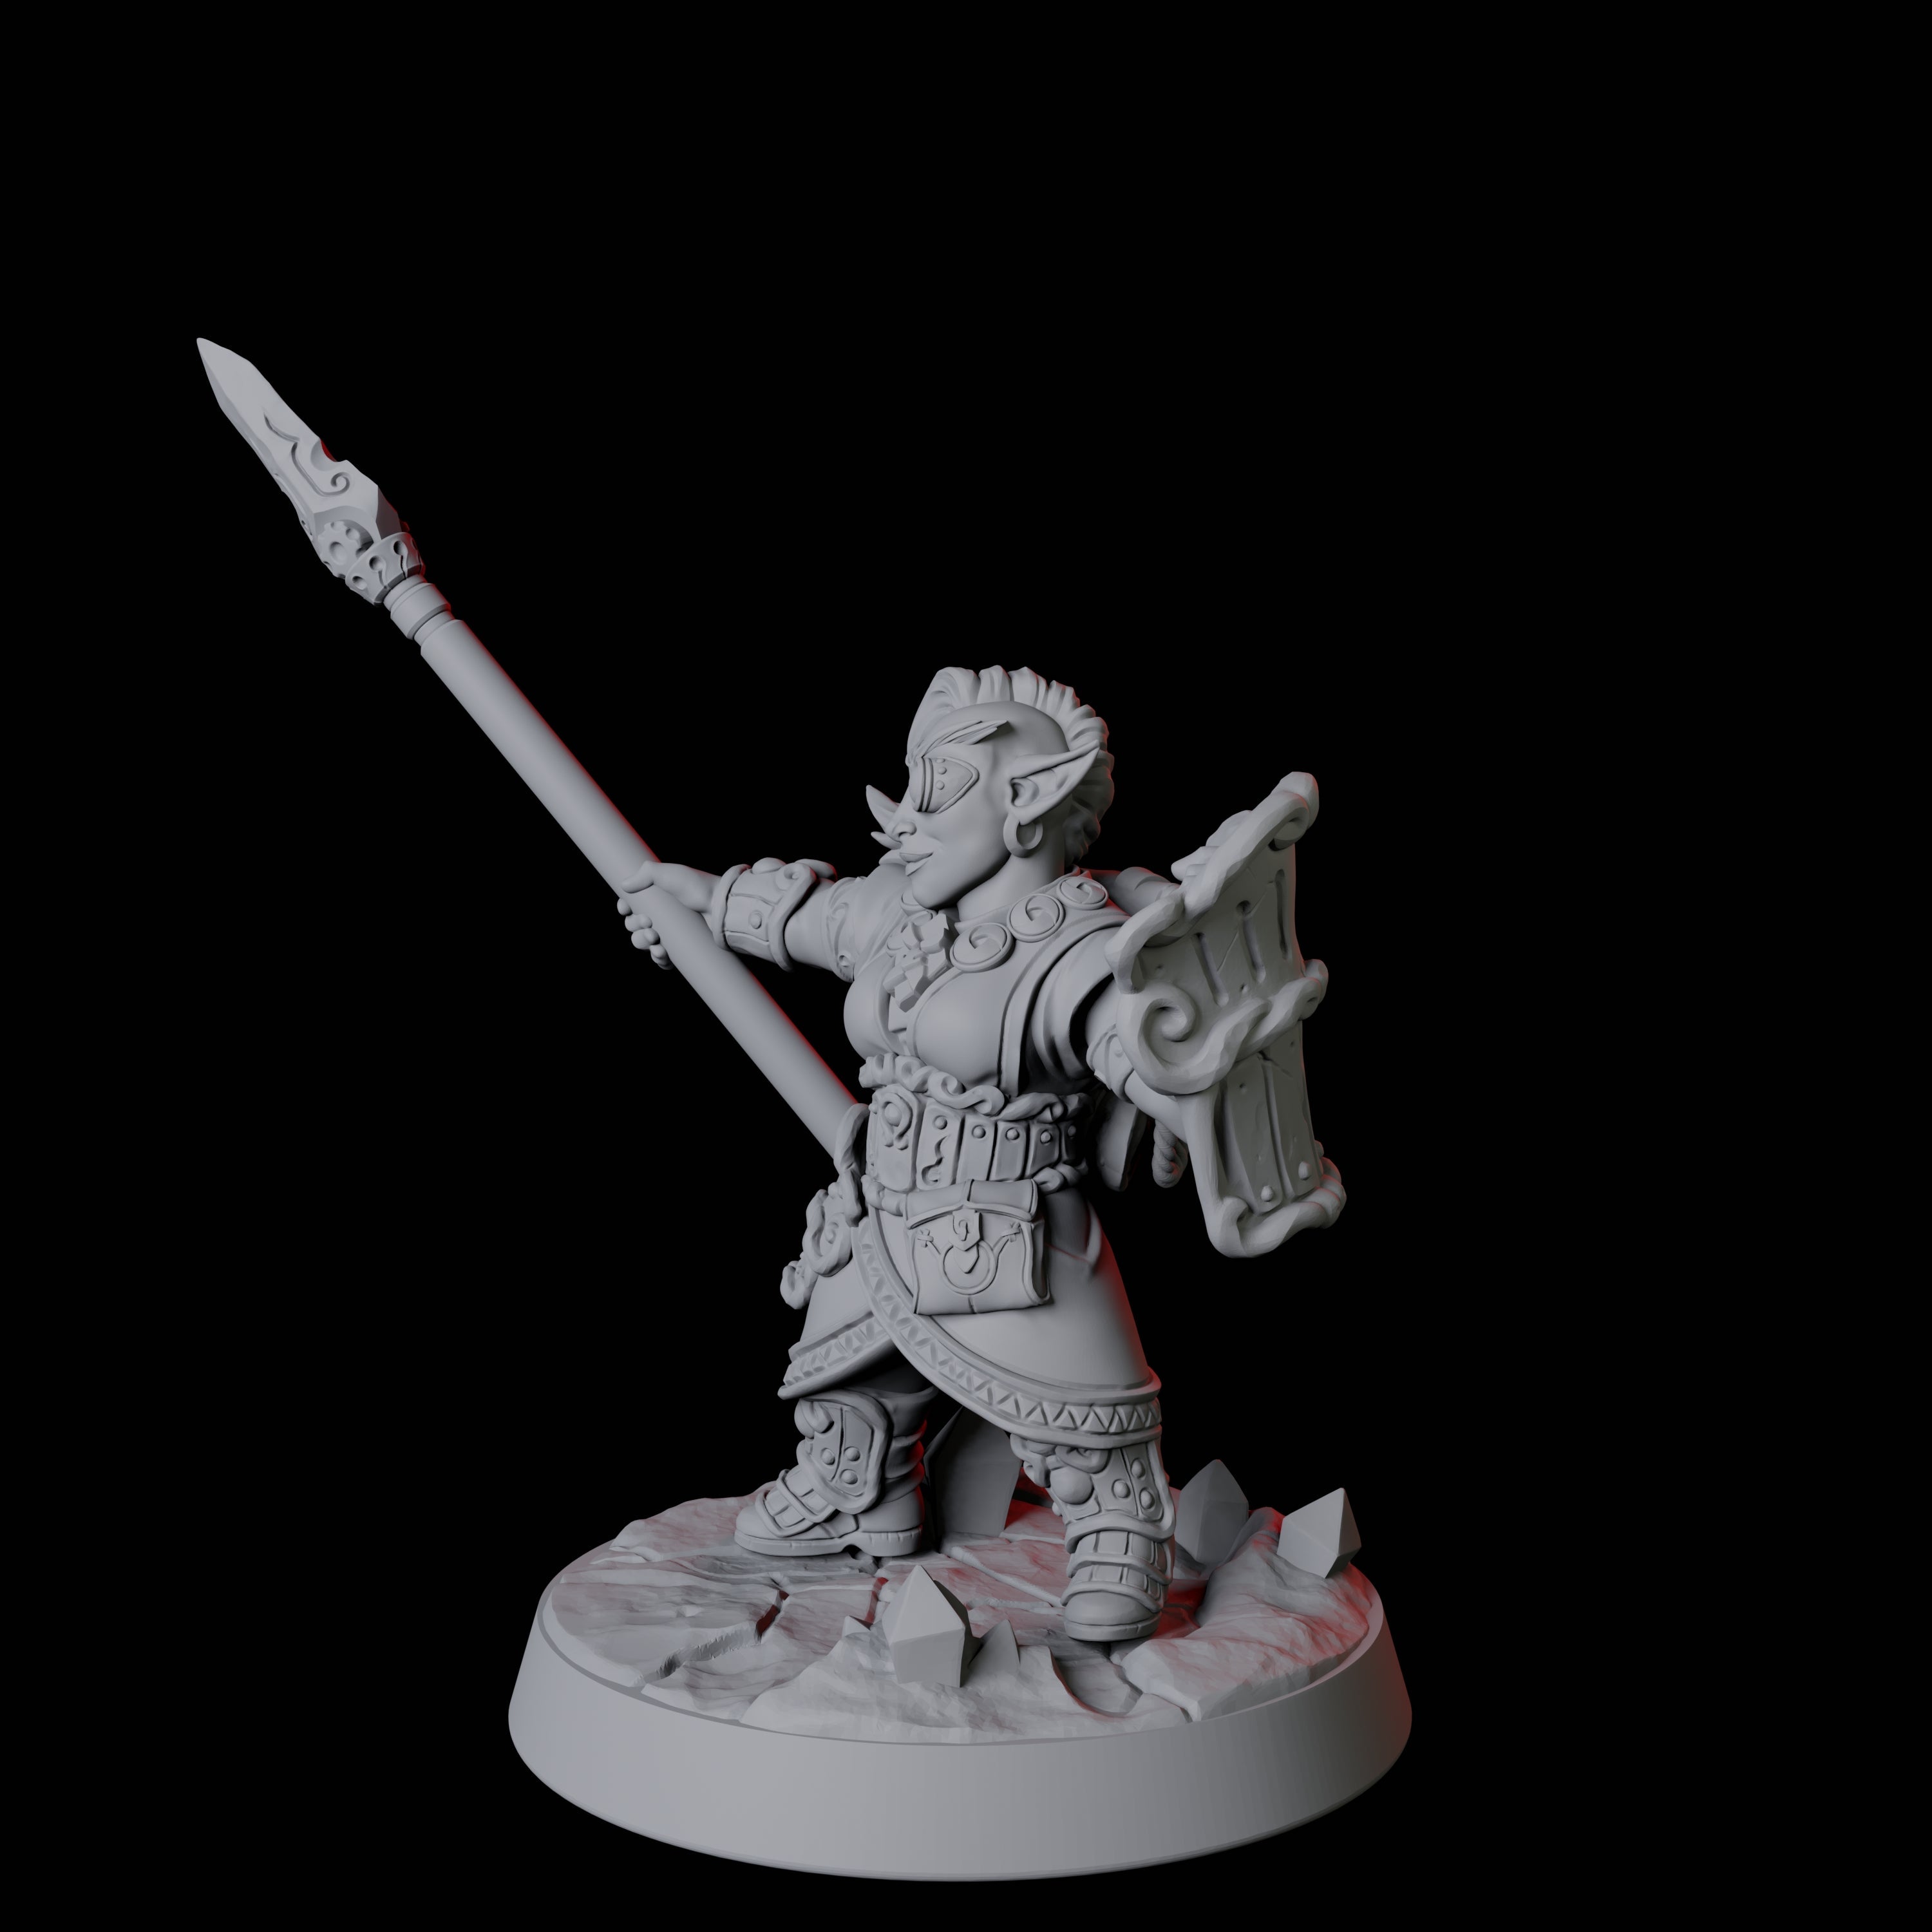 Gnome Miner E Miniature for Dungeons and Dragons, Pathfinder or other TTRPGs